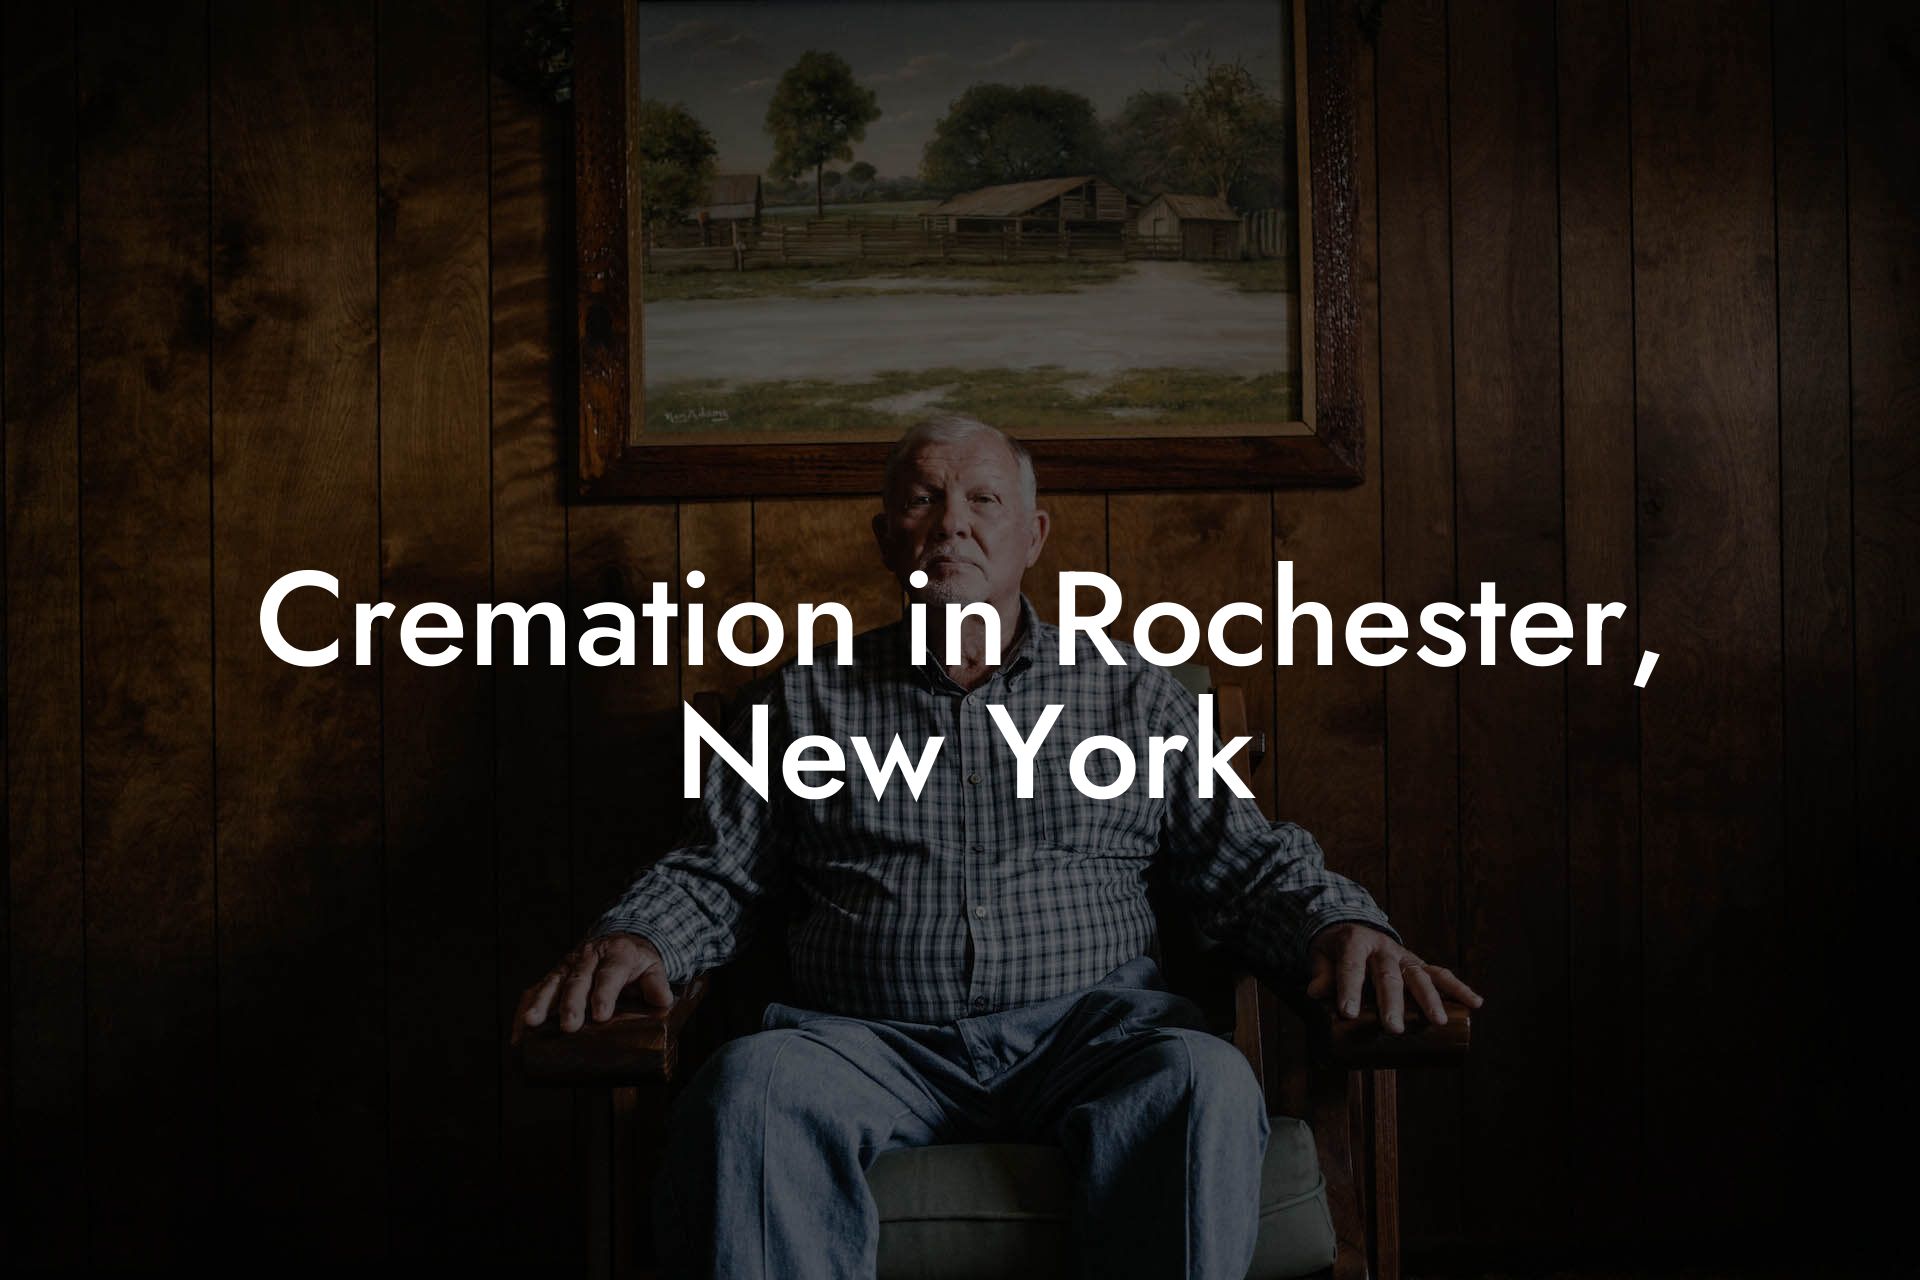 Cremation in Rochester, New York